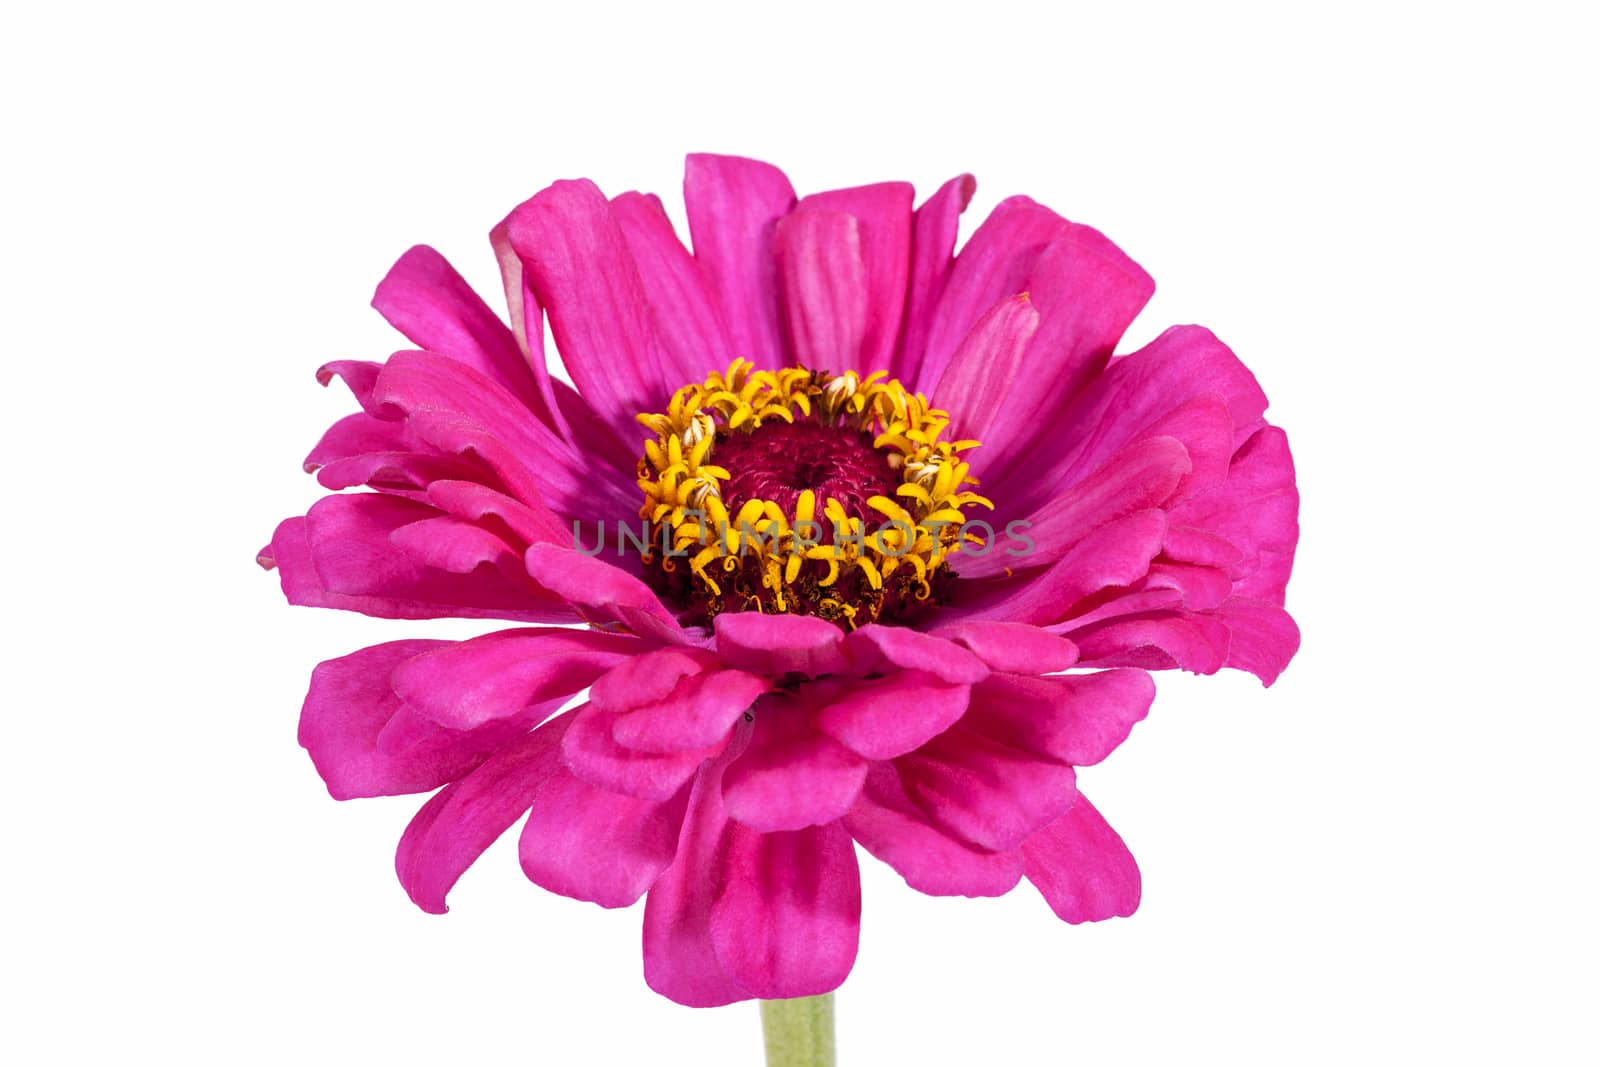 Single flower of pink zinnia isolated on white background, close up by mychadre77